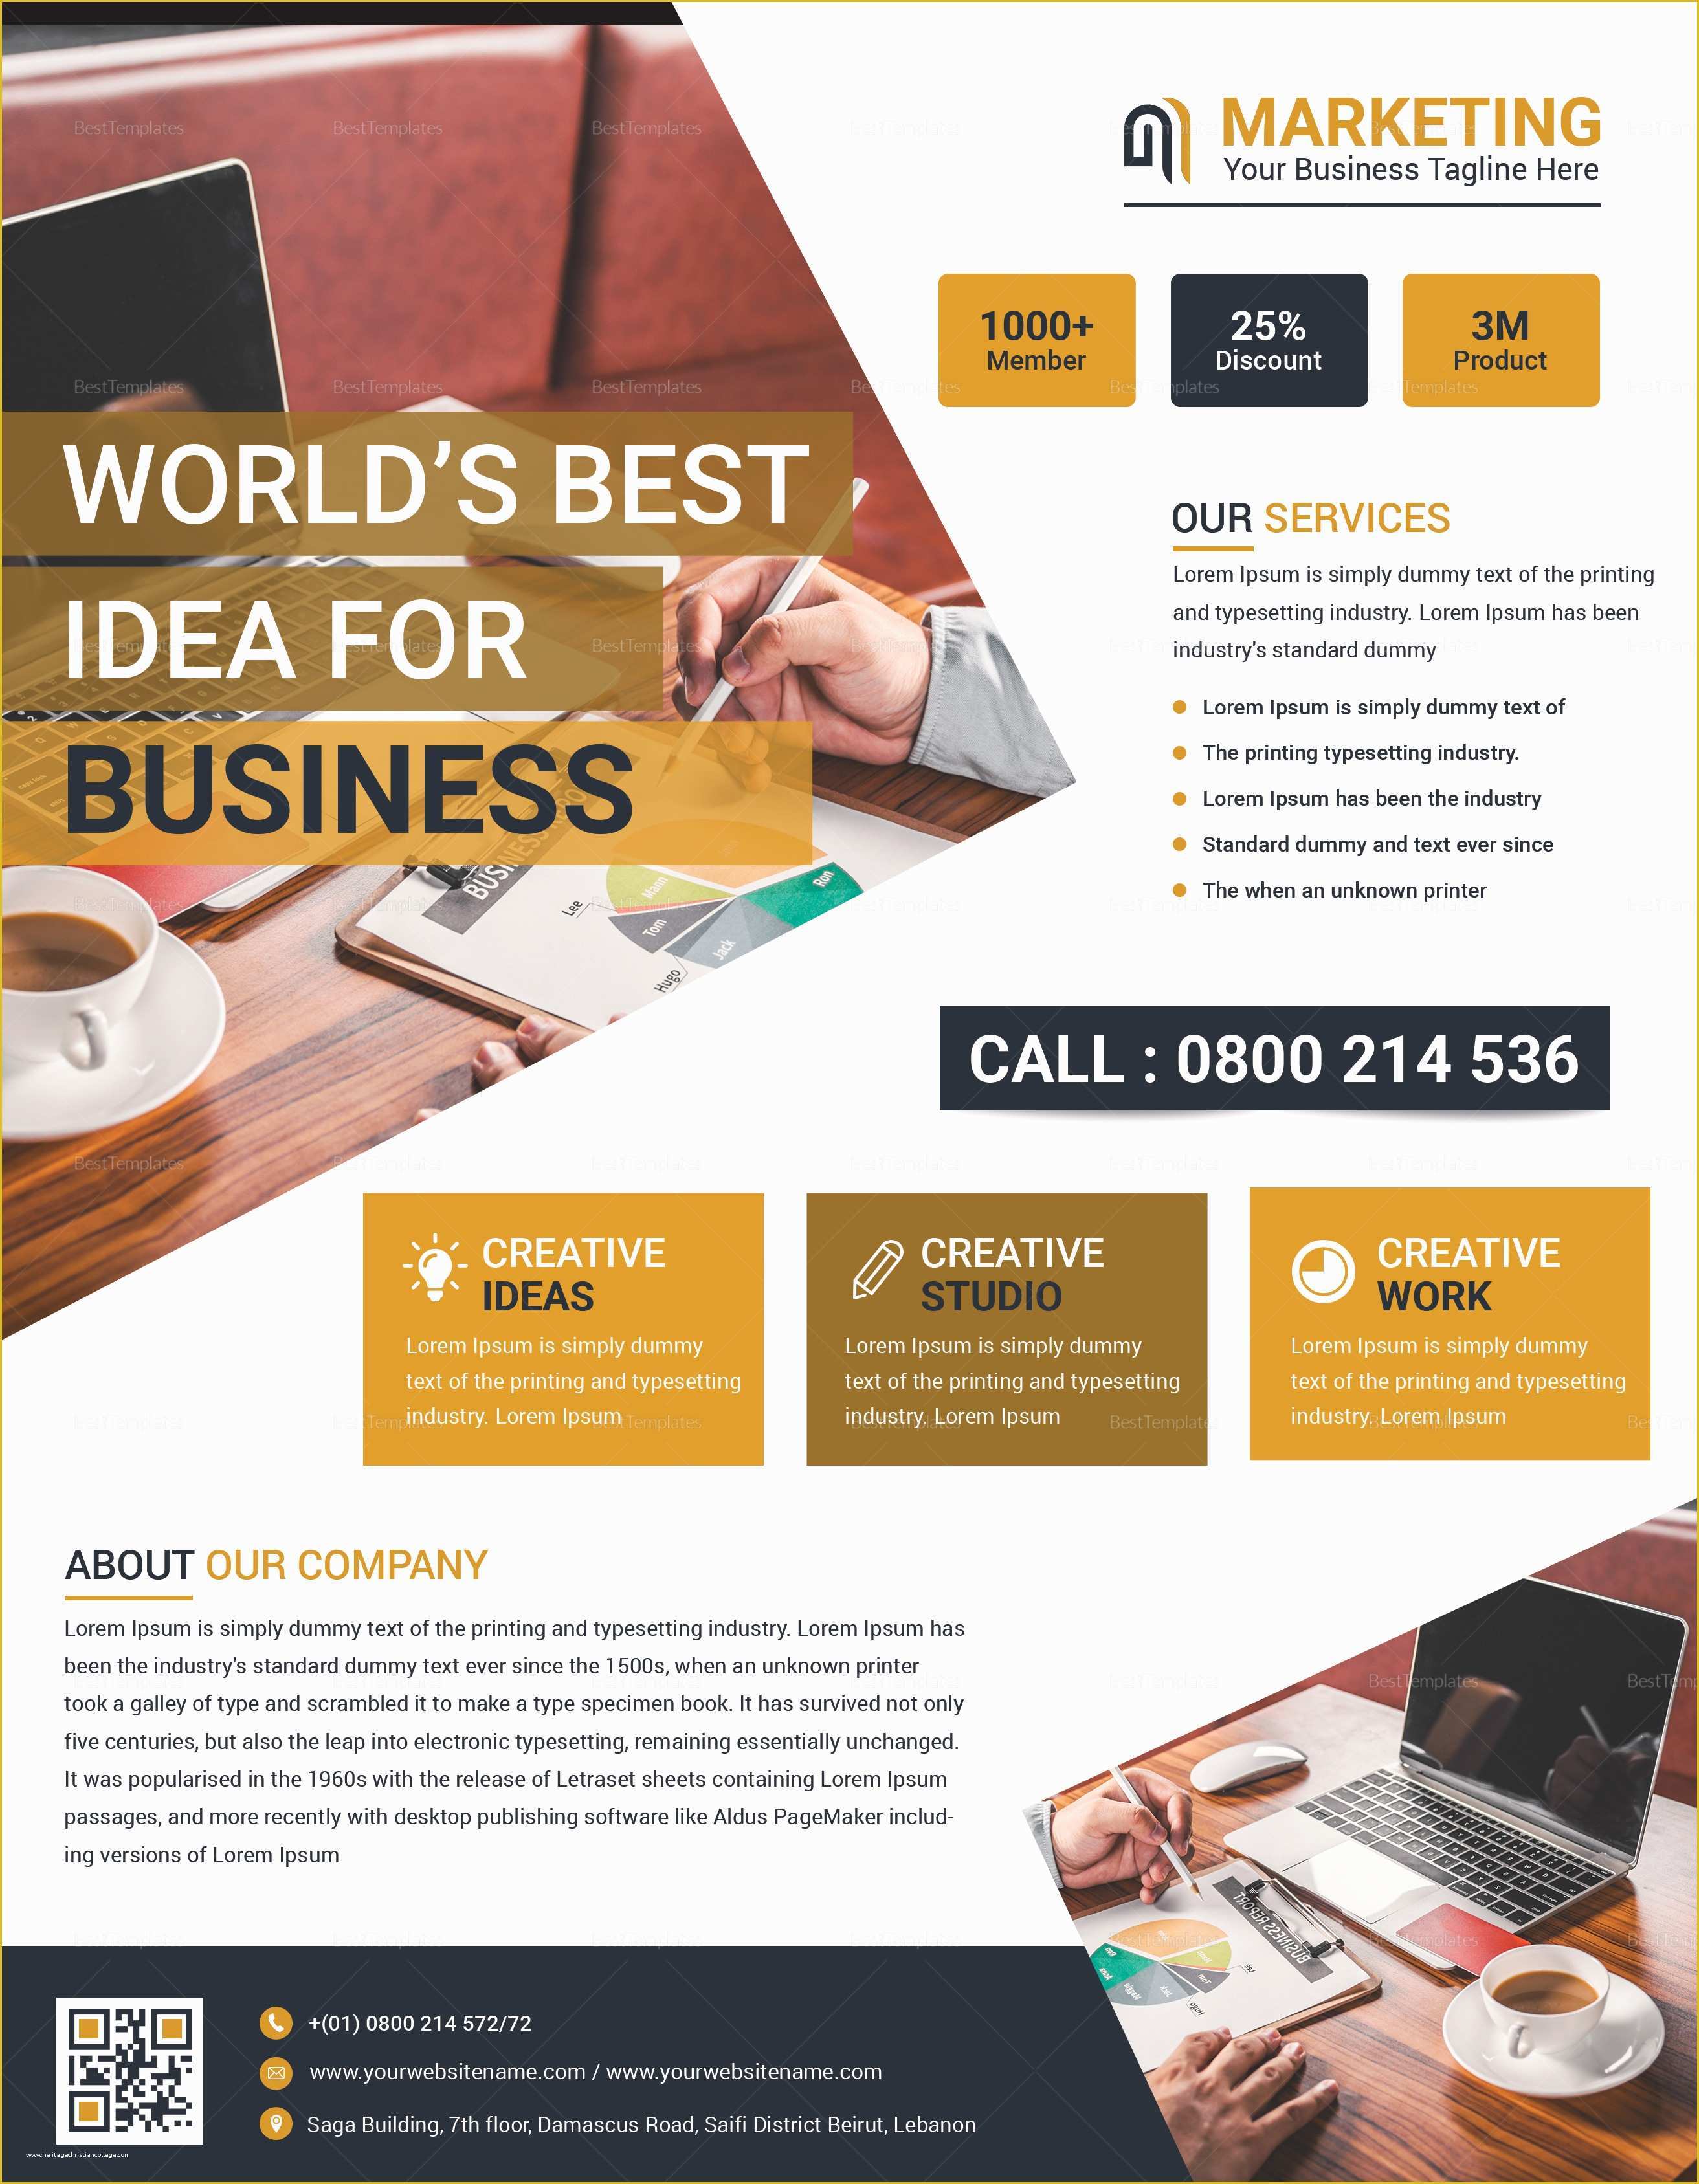 Marketing Flyer Templates Free Word Of Business Marketing Flyer Design Template In Word Psd